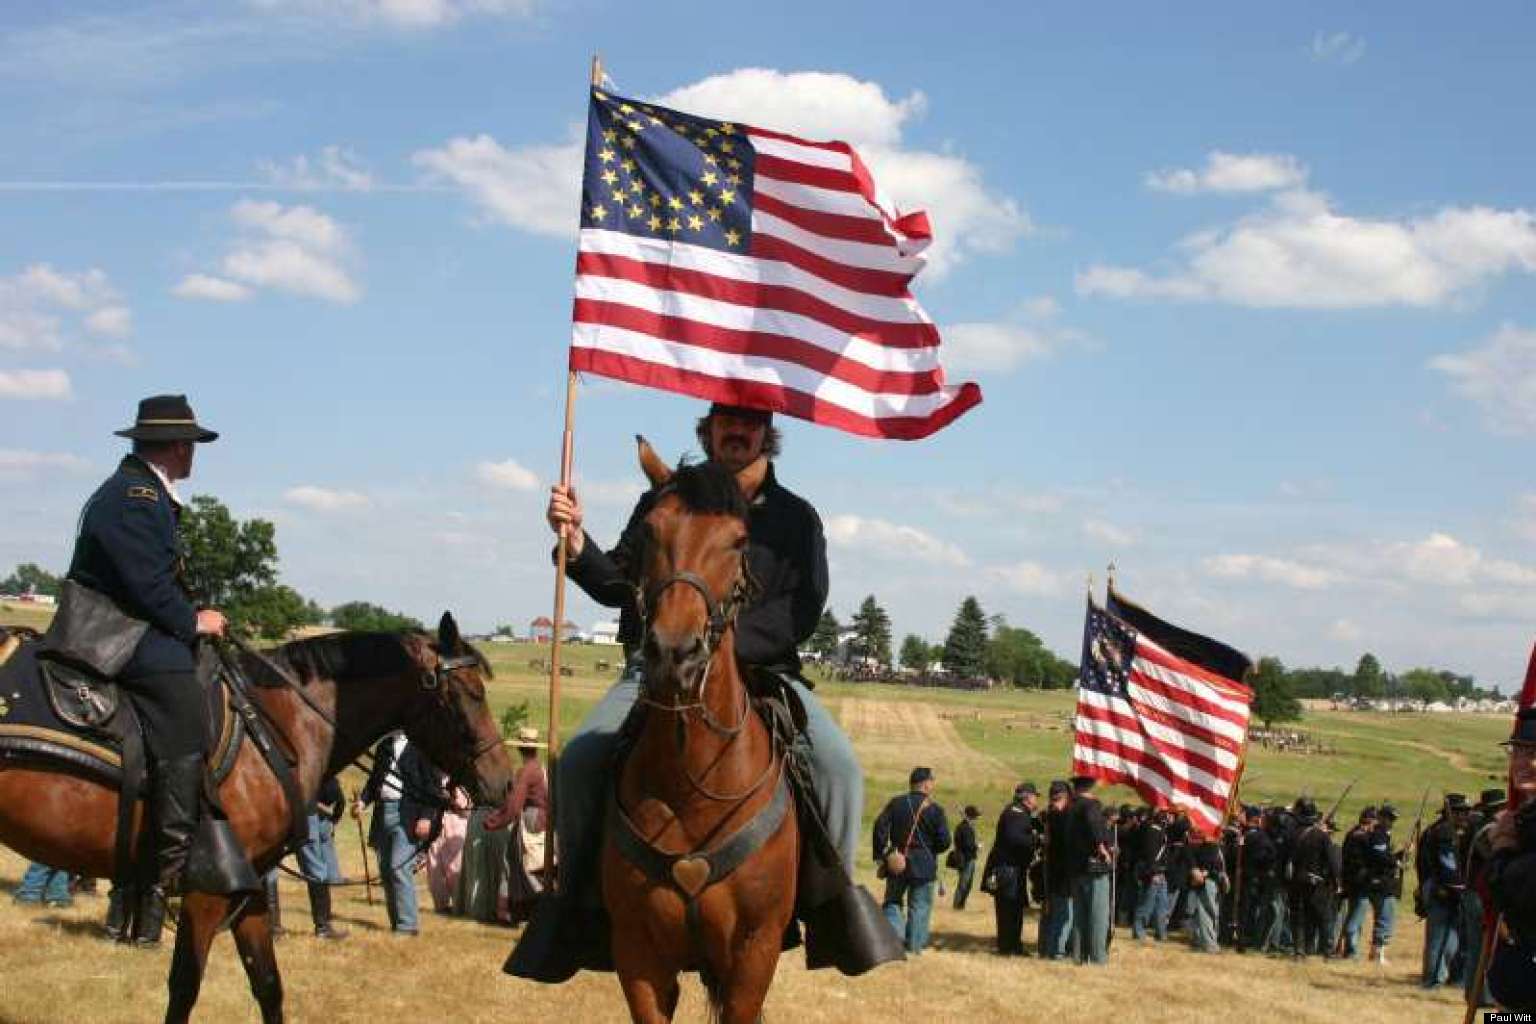 Battle Of Gettysburg 150th Anniversary To Be Commemorated With